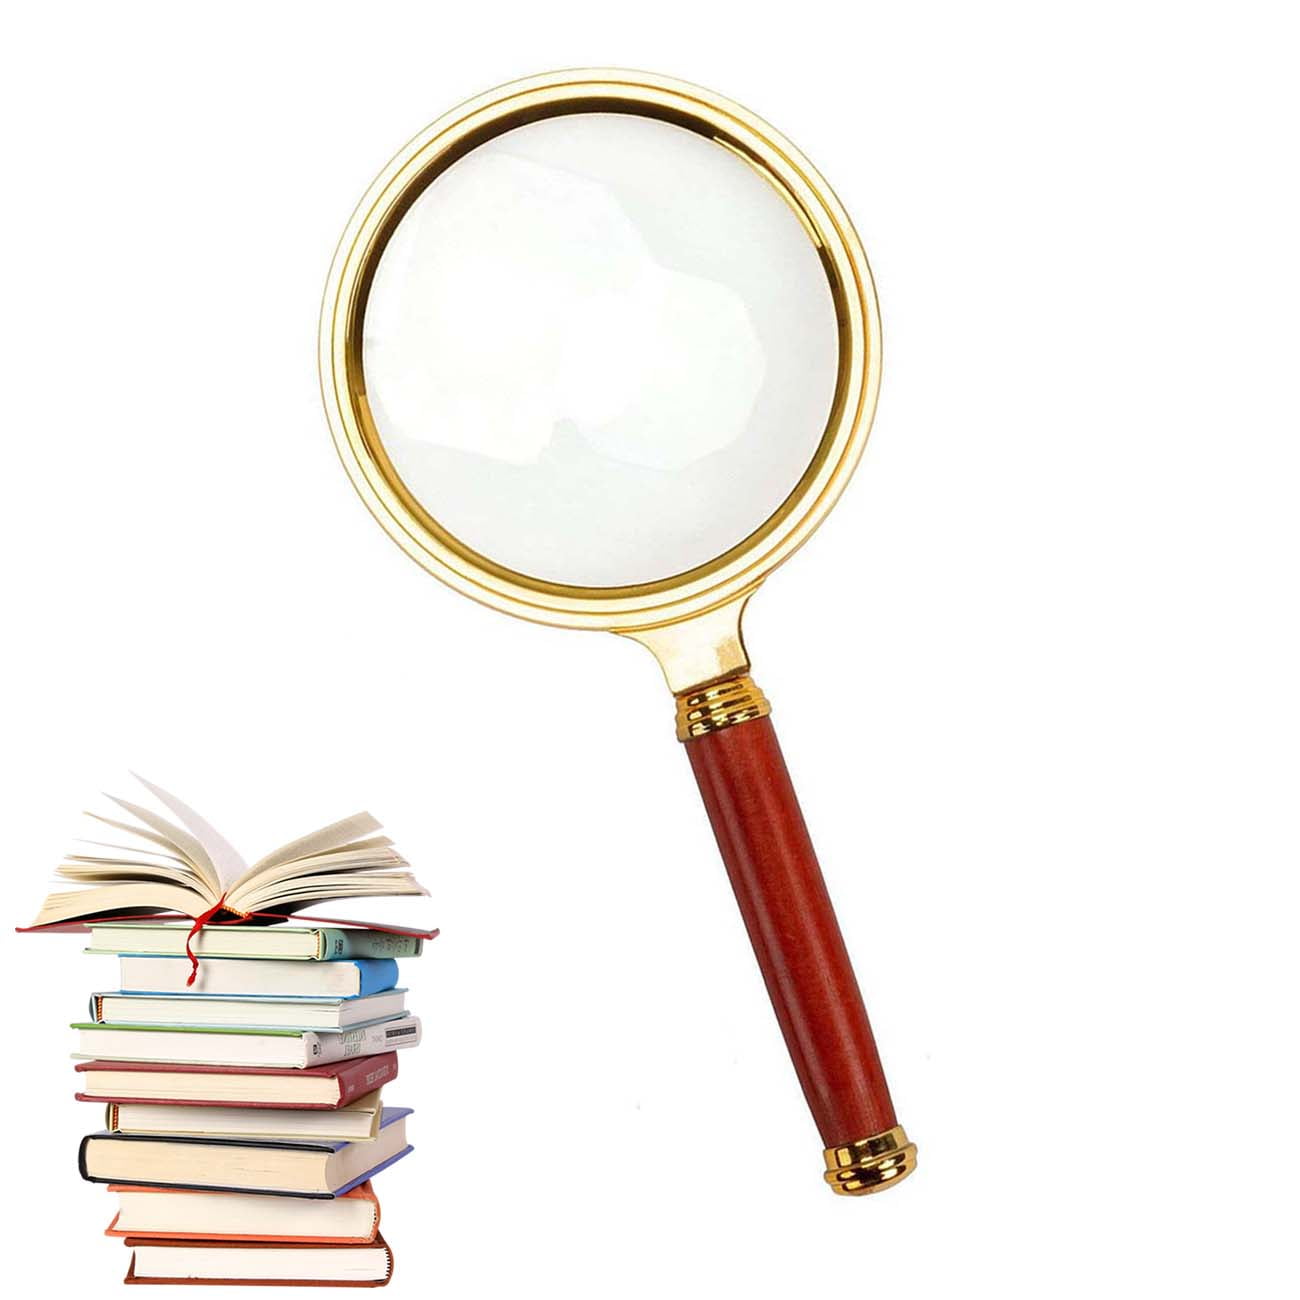 Science for Seniors Kids Thickened Rubbery Frame with Non-Slip Soft Handle for Newspaper Reading Insect Handheld Reading Magnifier Green DREAMZE 4X Magnifying Glass 75mm Magnifying Glass Lens